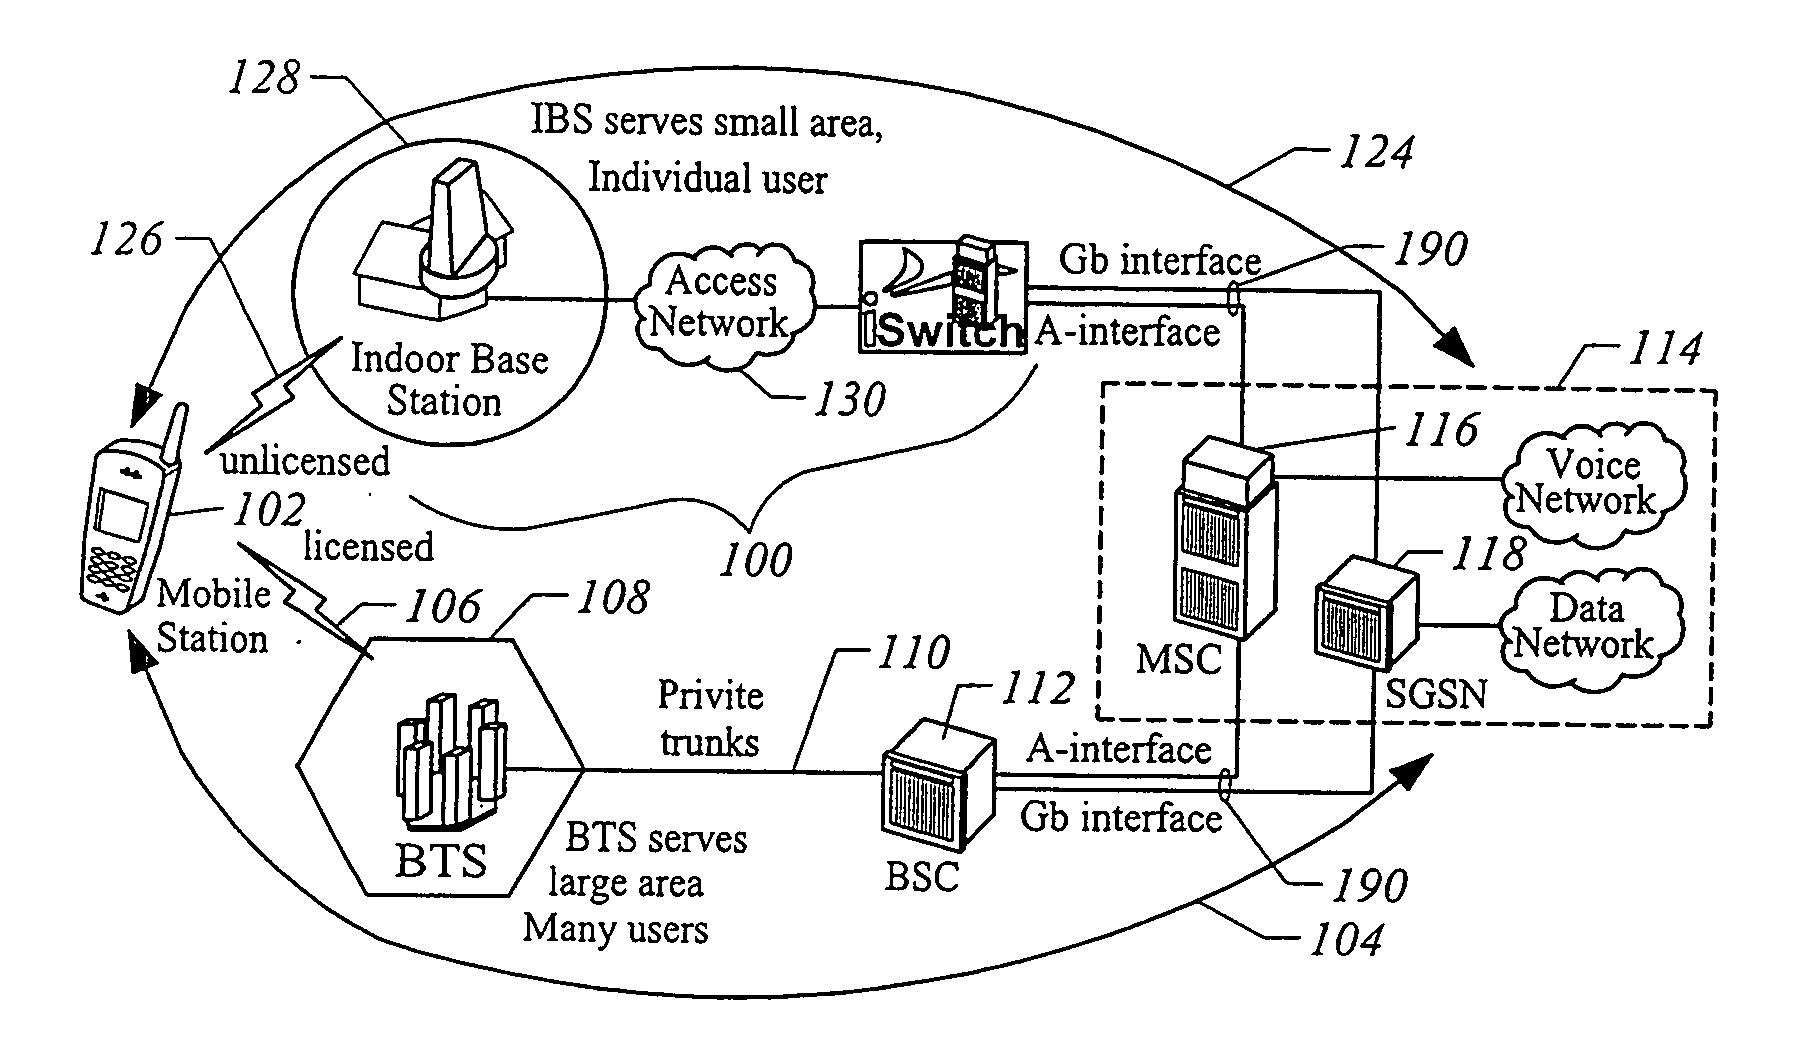 Ciphering configuration procedure in an unlicensed wireless communication system